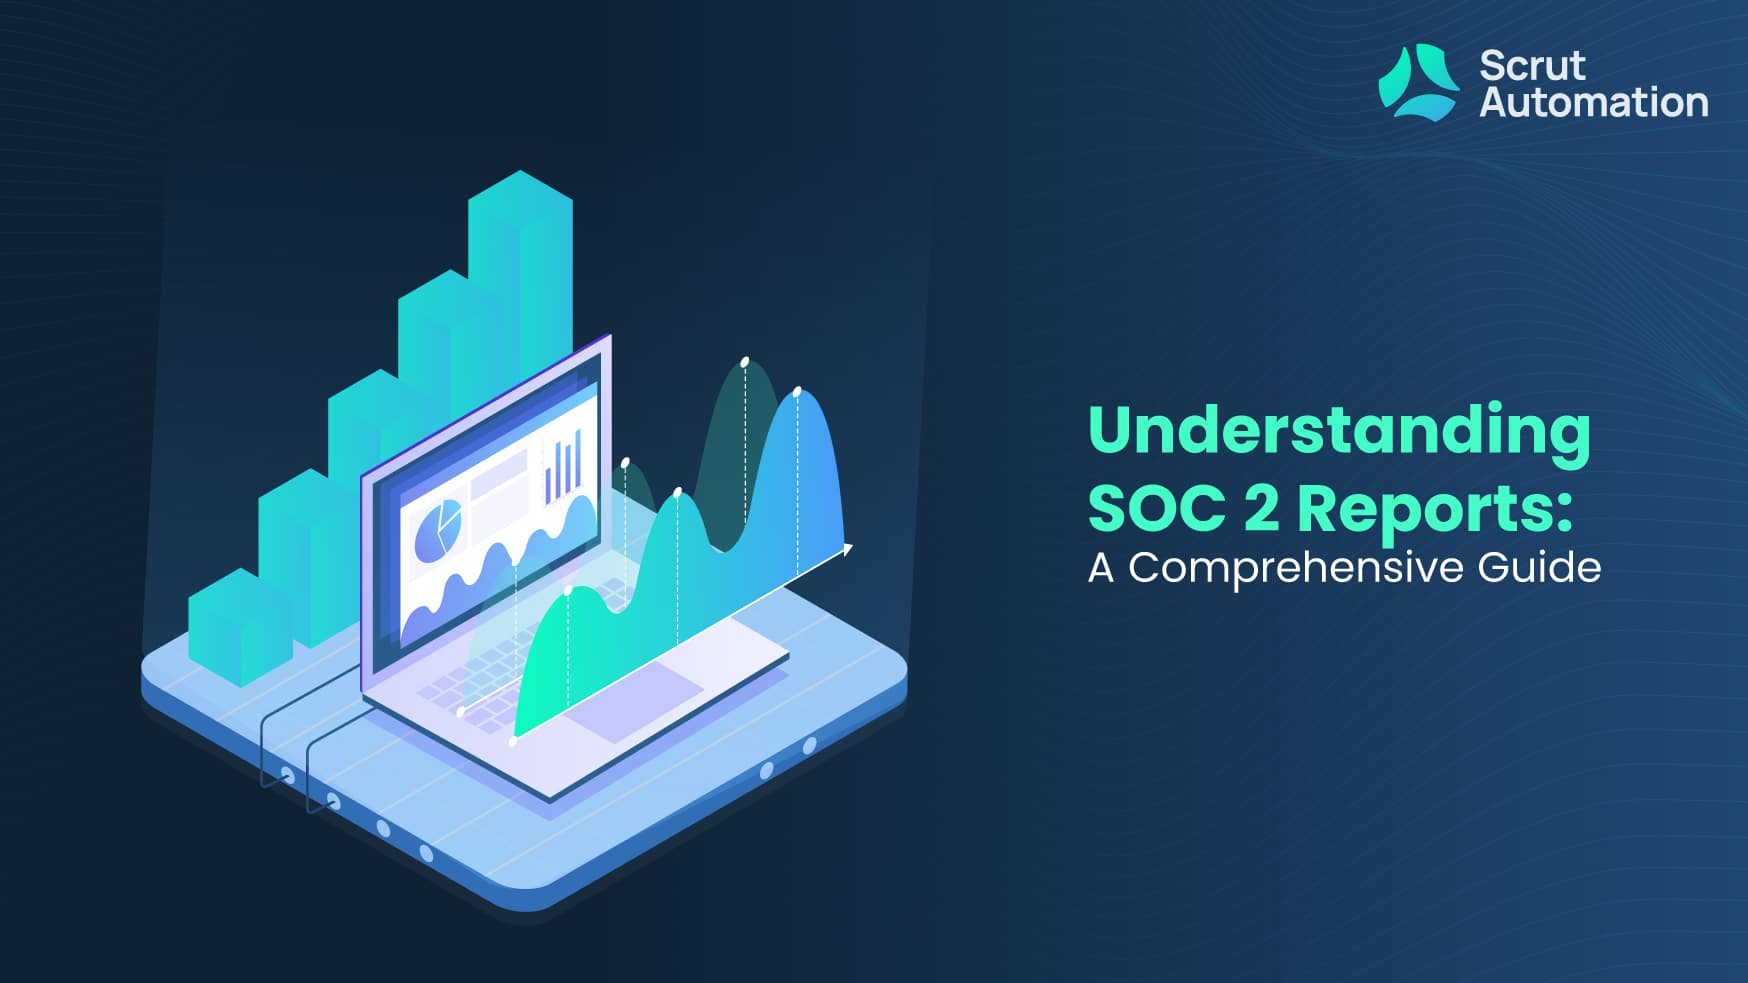 What is a SOC 2 Report